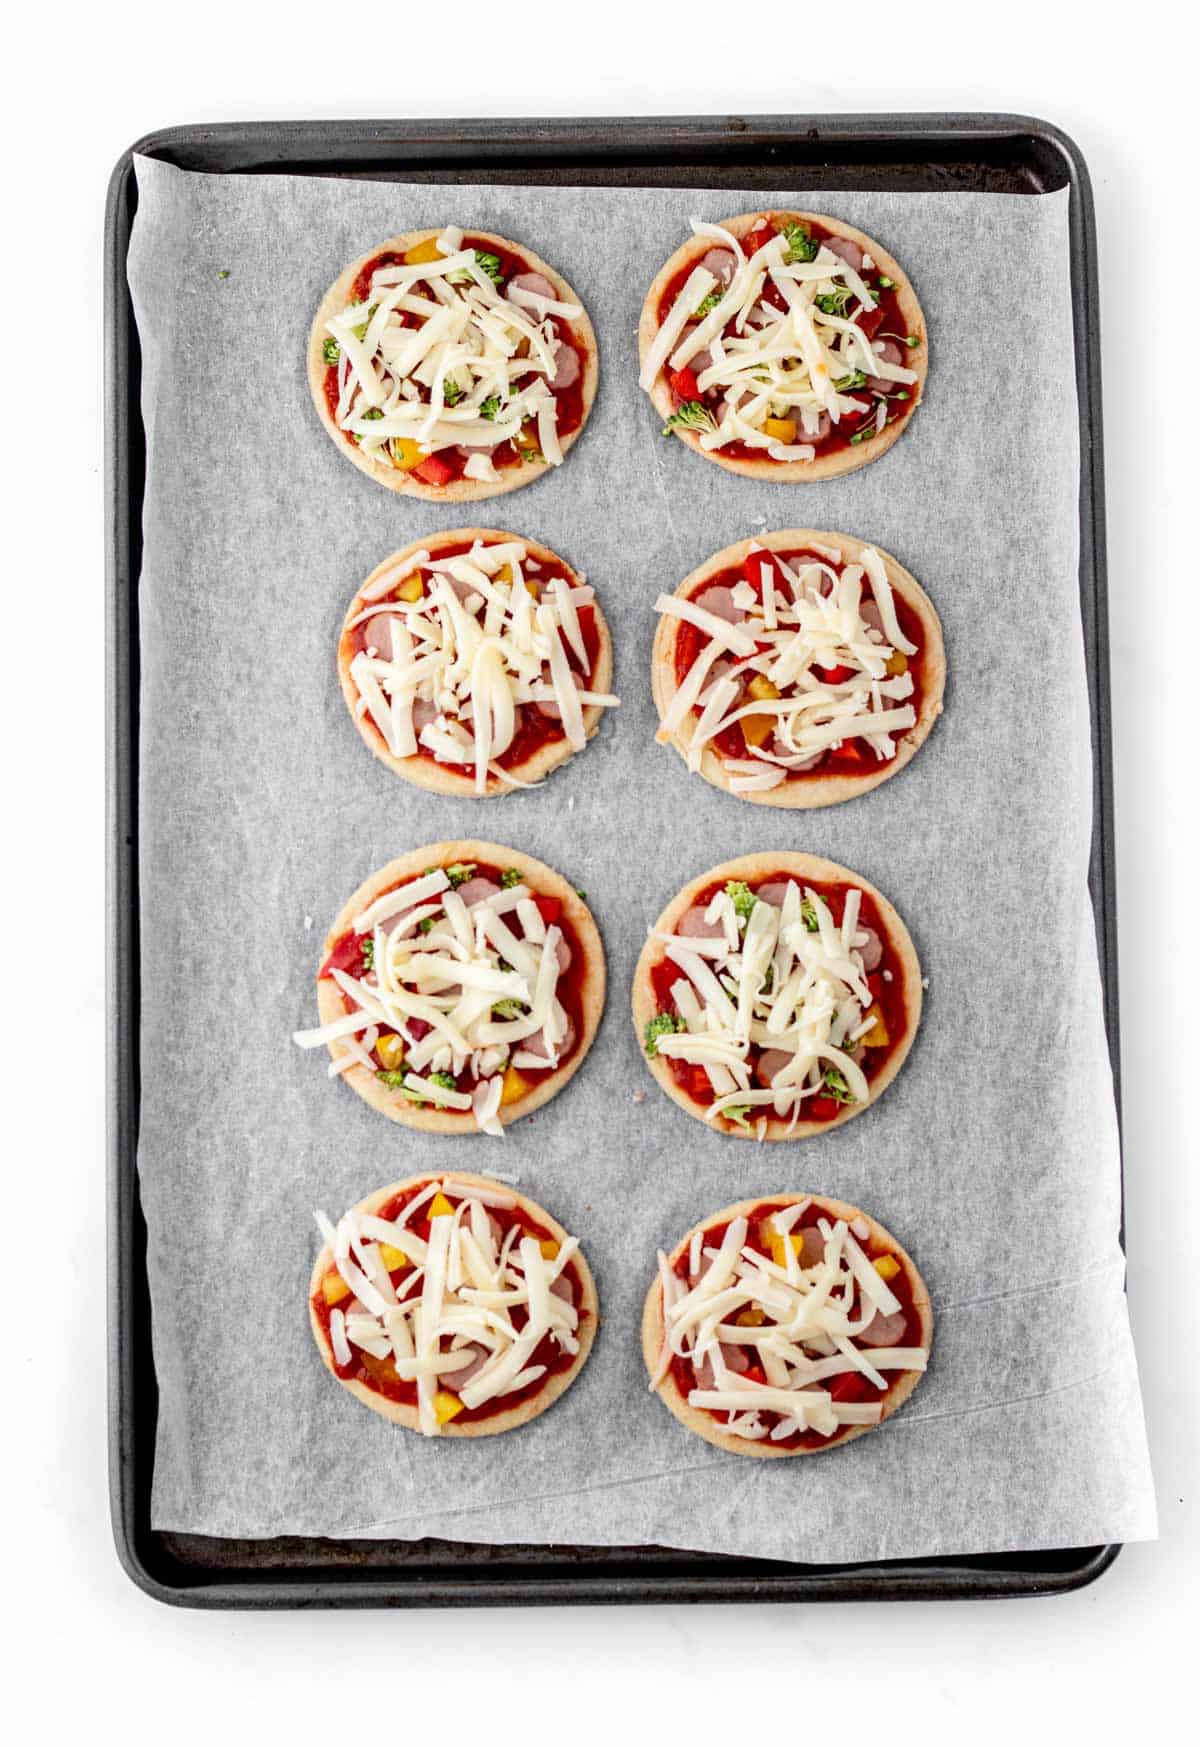 Toppings on the homemade mini pizzas on a baking sheet ready to be cooked.